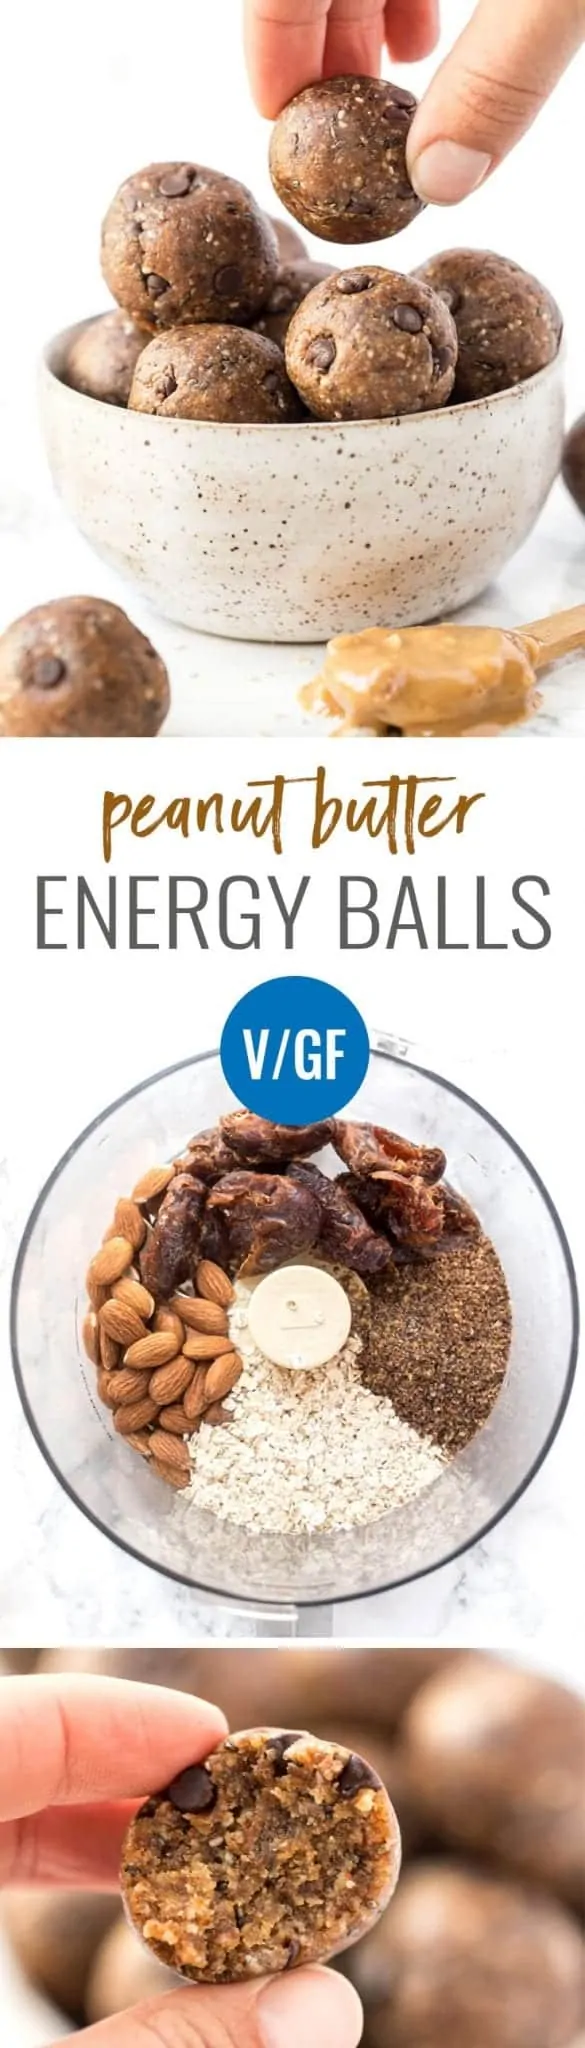 peanut butter energy ball recipe with dates, oats and chocolate chips